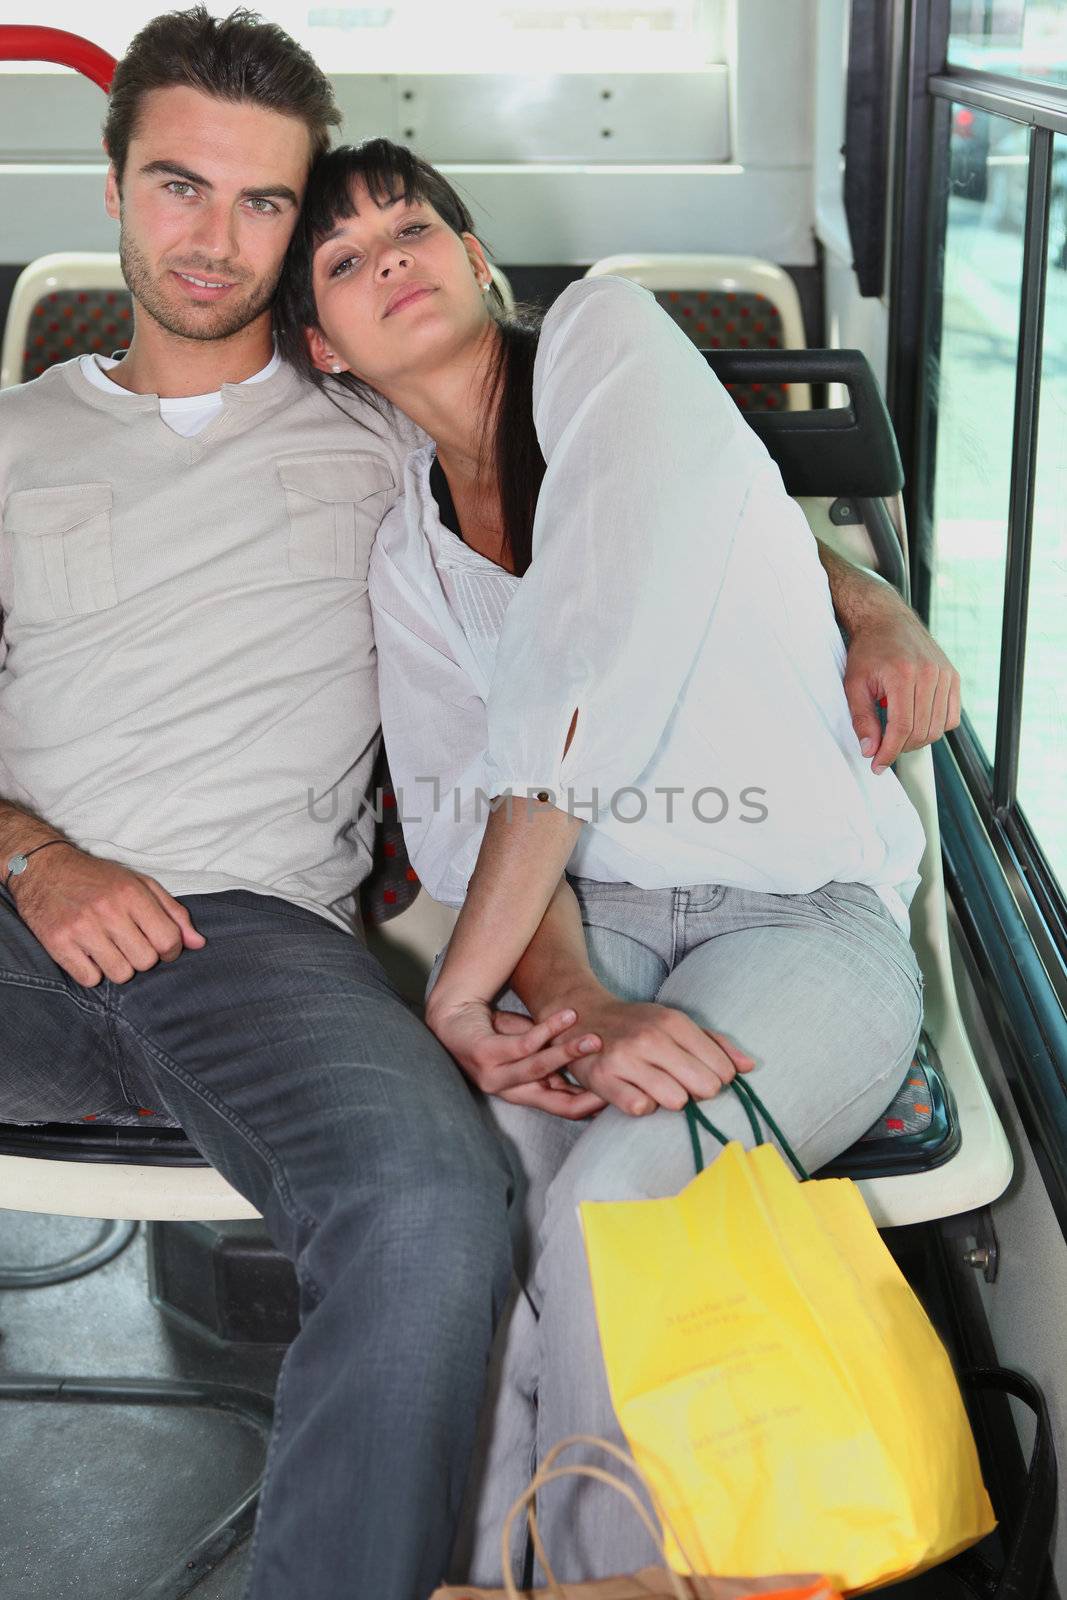 Couple embraced inside a bus by phovoir